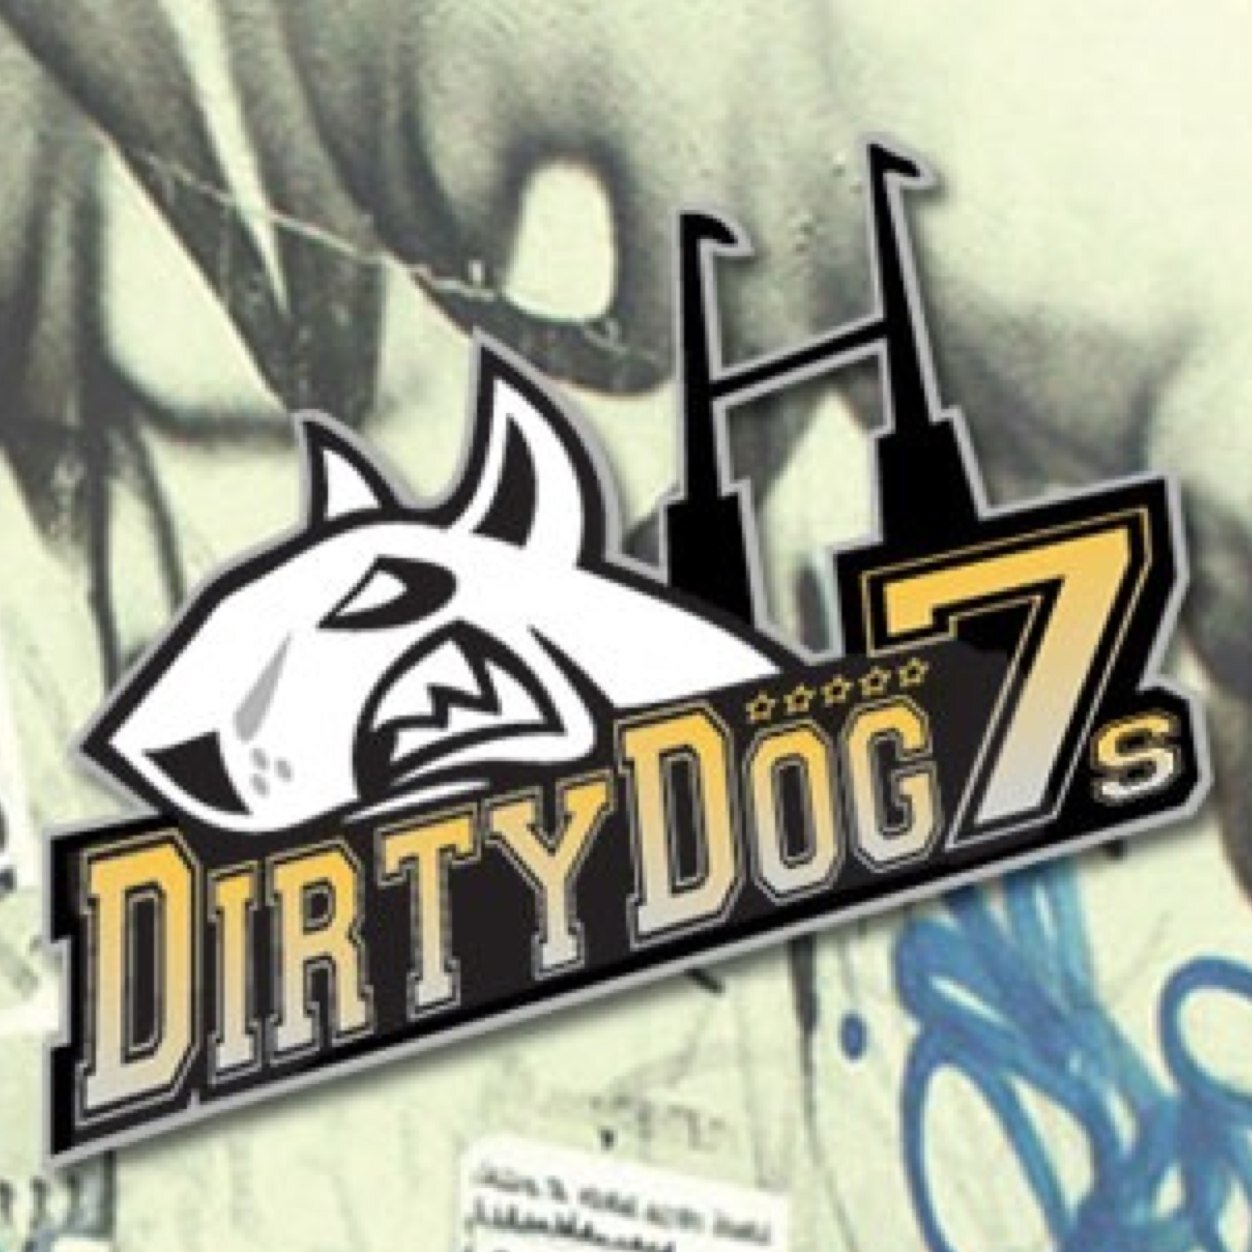 Dirty Dog Rugby Invitational 15s & 7s Team twitter account. http://t.co/YBrufVtrKe